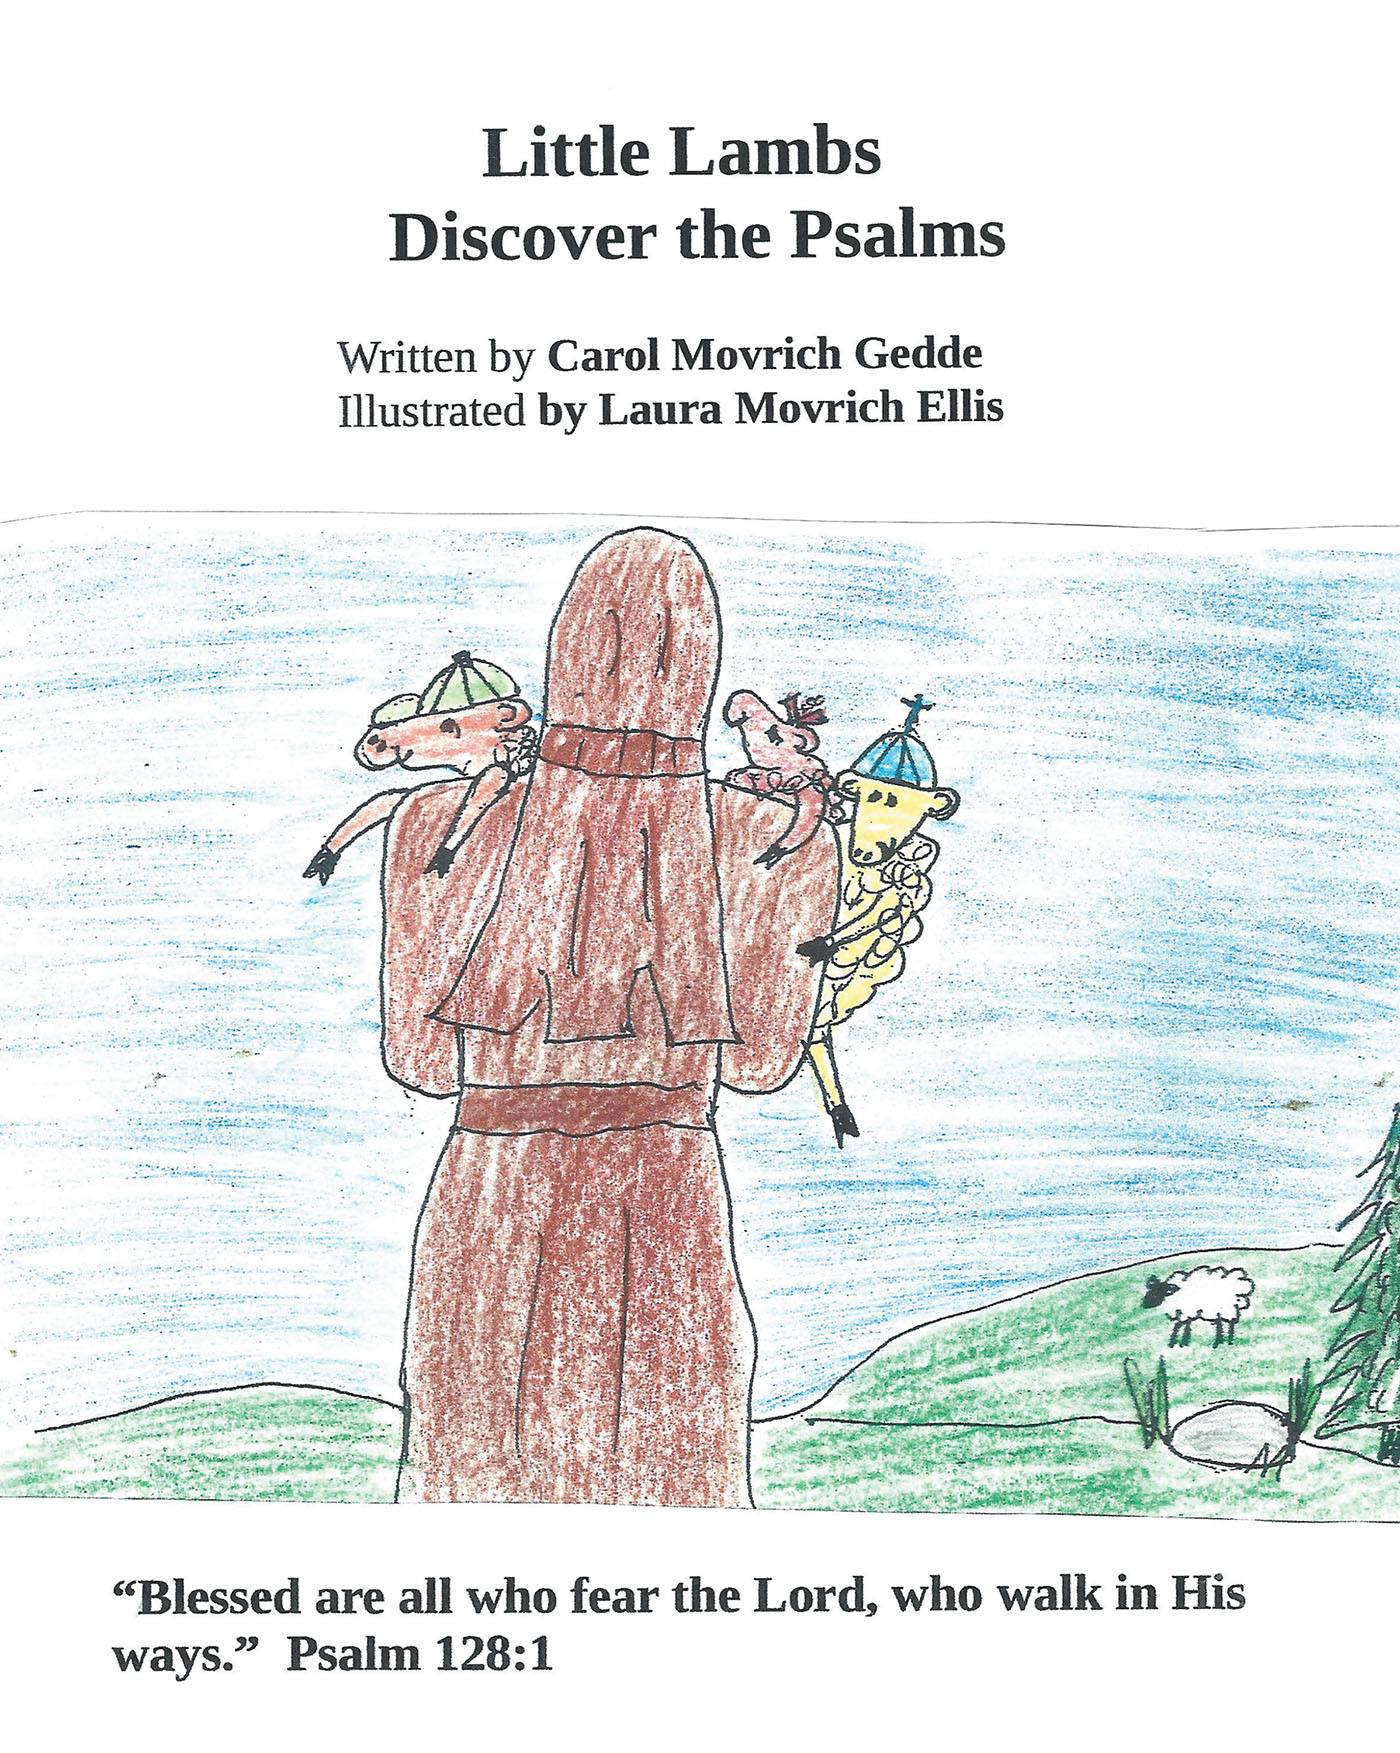 Carol Movrich Gedde’s Newly Released "Little Lambs Discover the Psalms" is an Encouraging Resource for Upcoming Believers